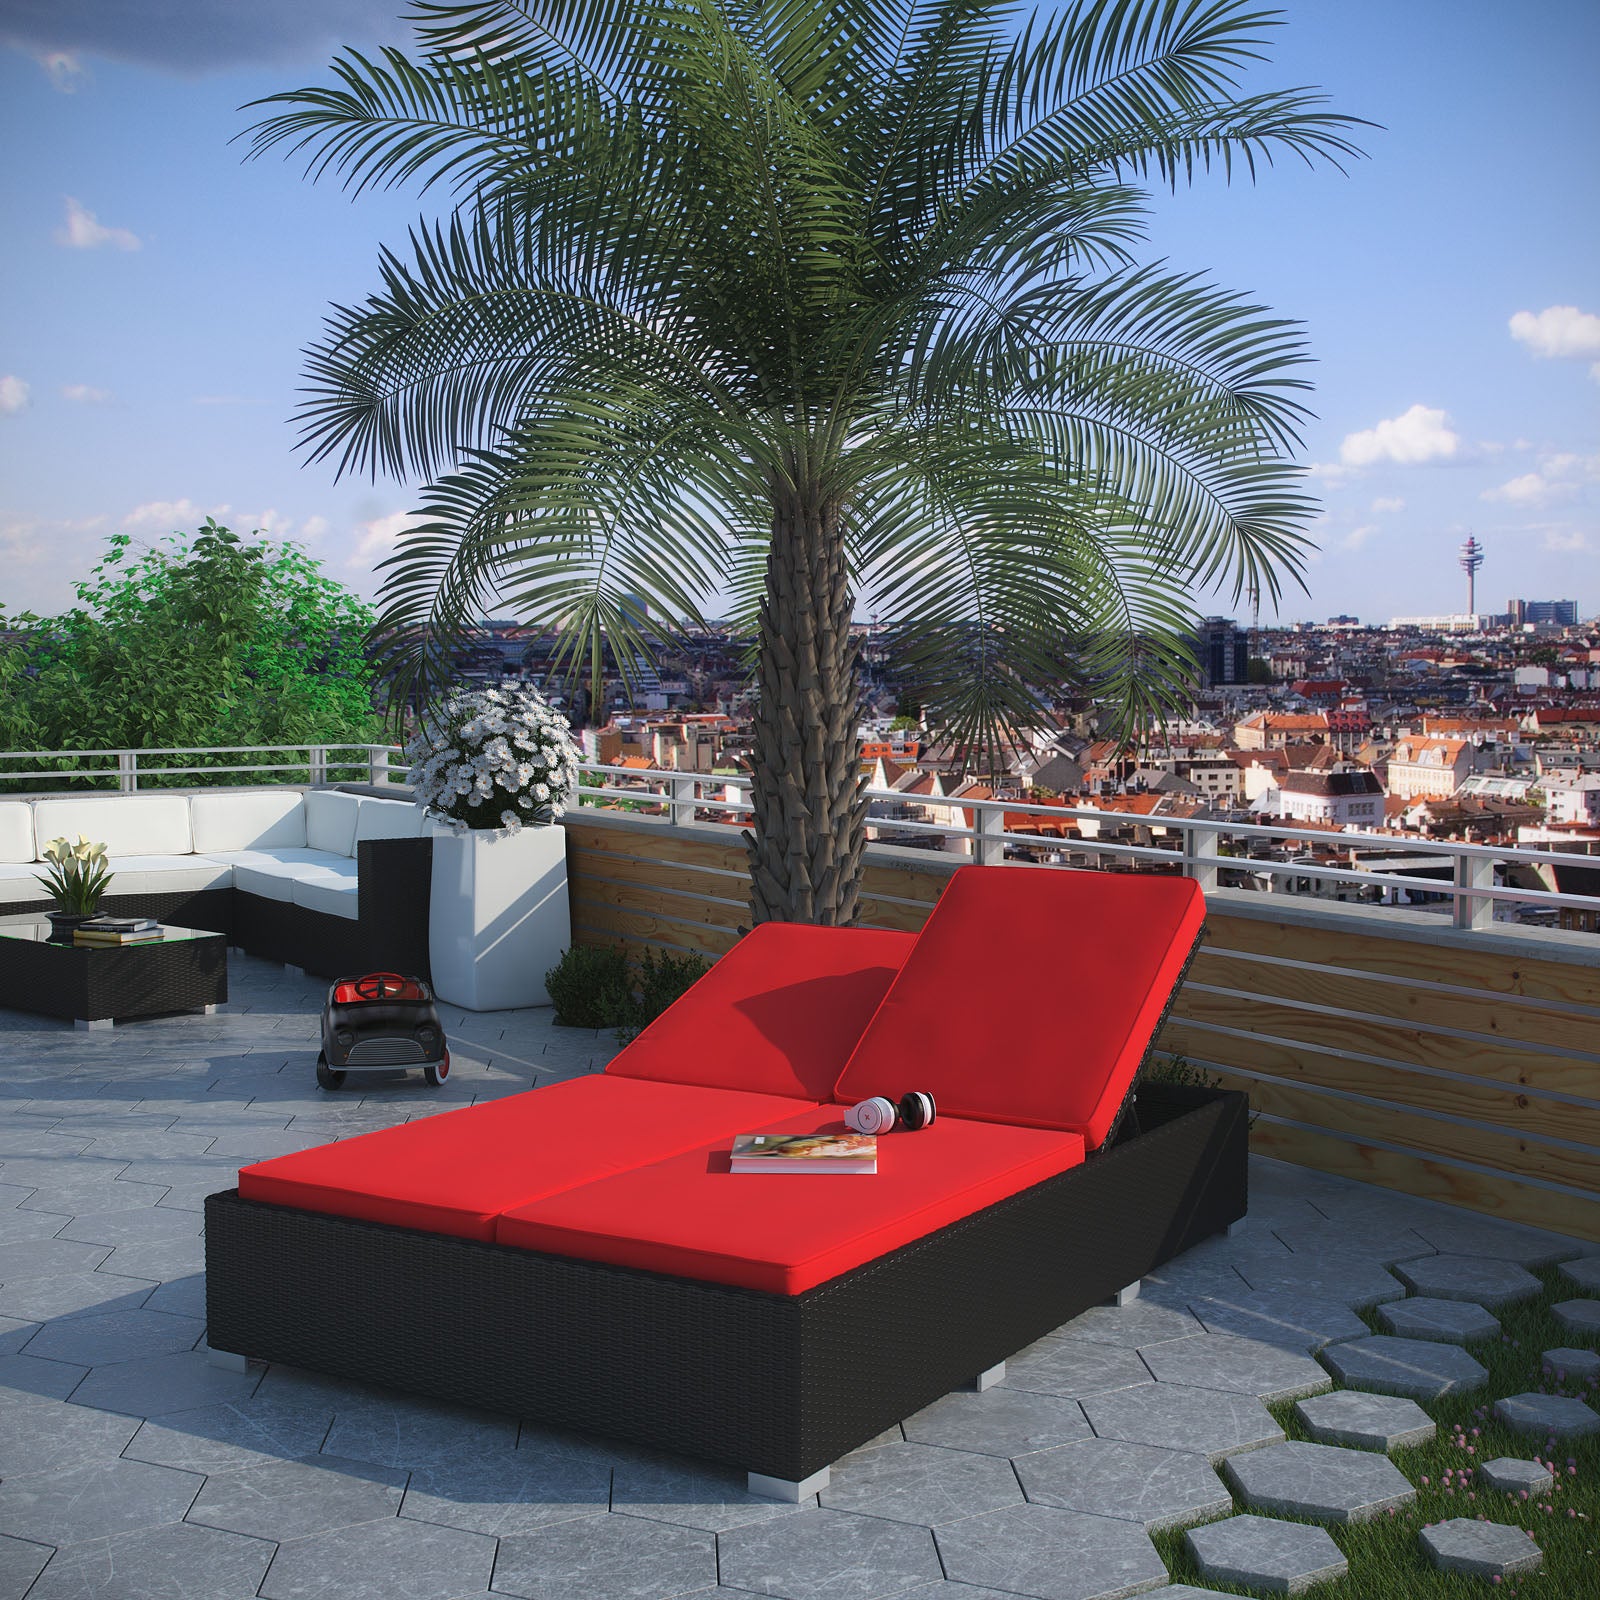 Evince Double Outdoor Patio Chaise-Outdoor Chaise-Modway-Wall2Wall Furnishings